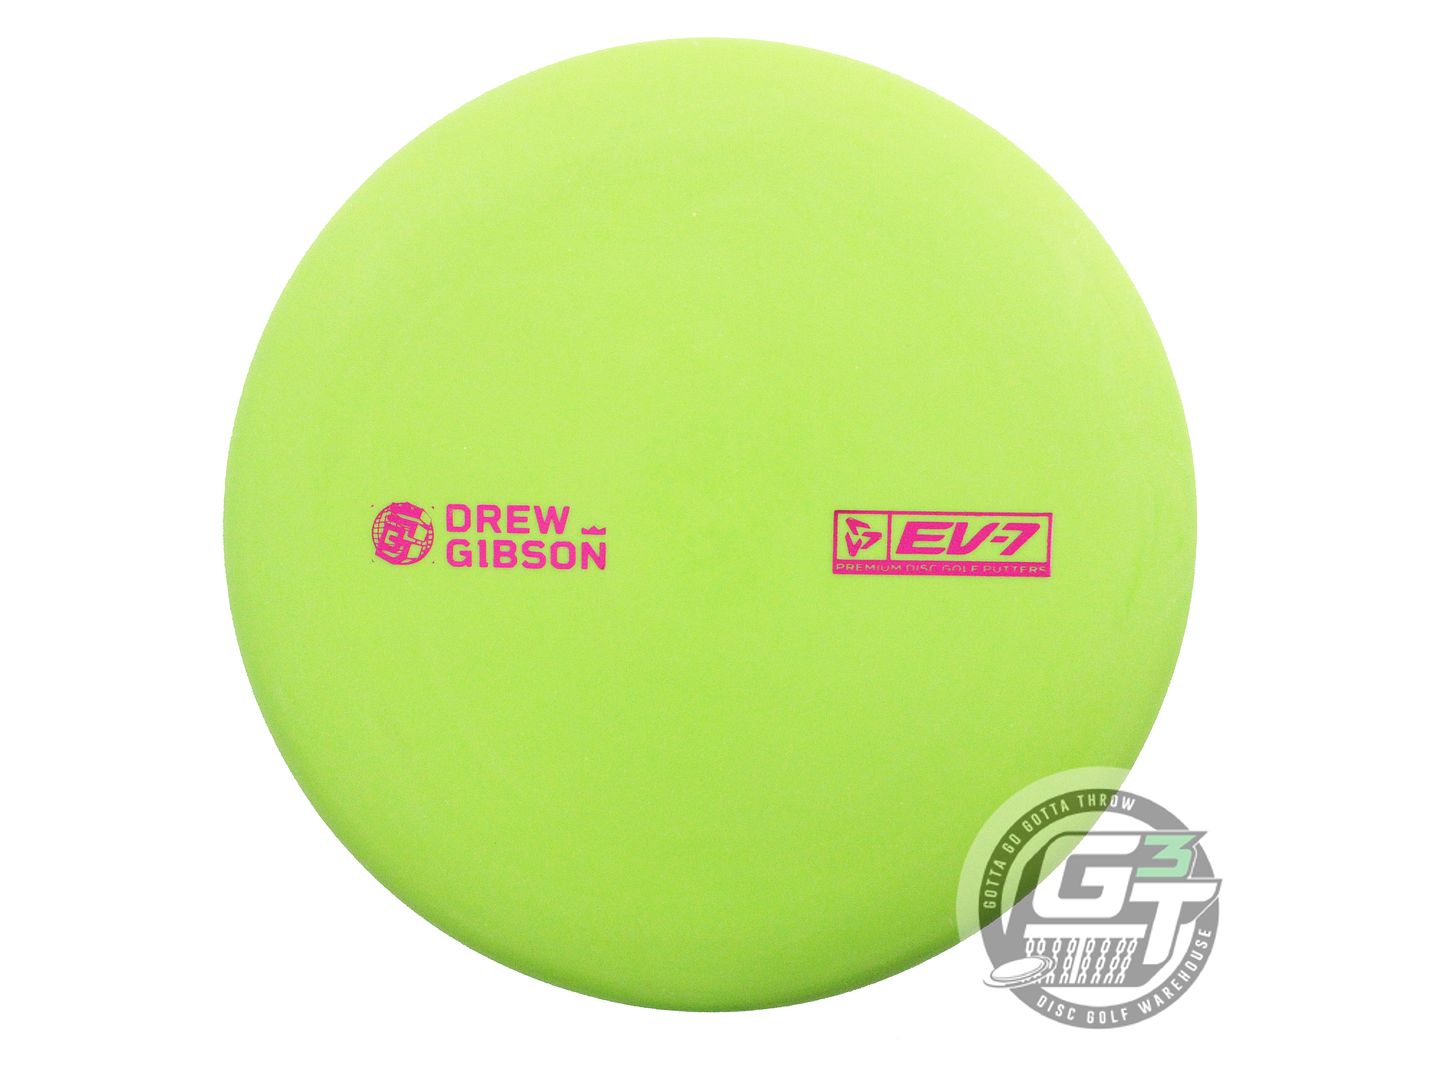 EV-7 Limited Edition 2021 Tour Series Drew Gibson OG Base Penrose Putter Golf Disc (Individually Listed)